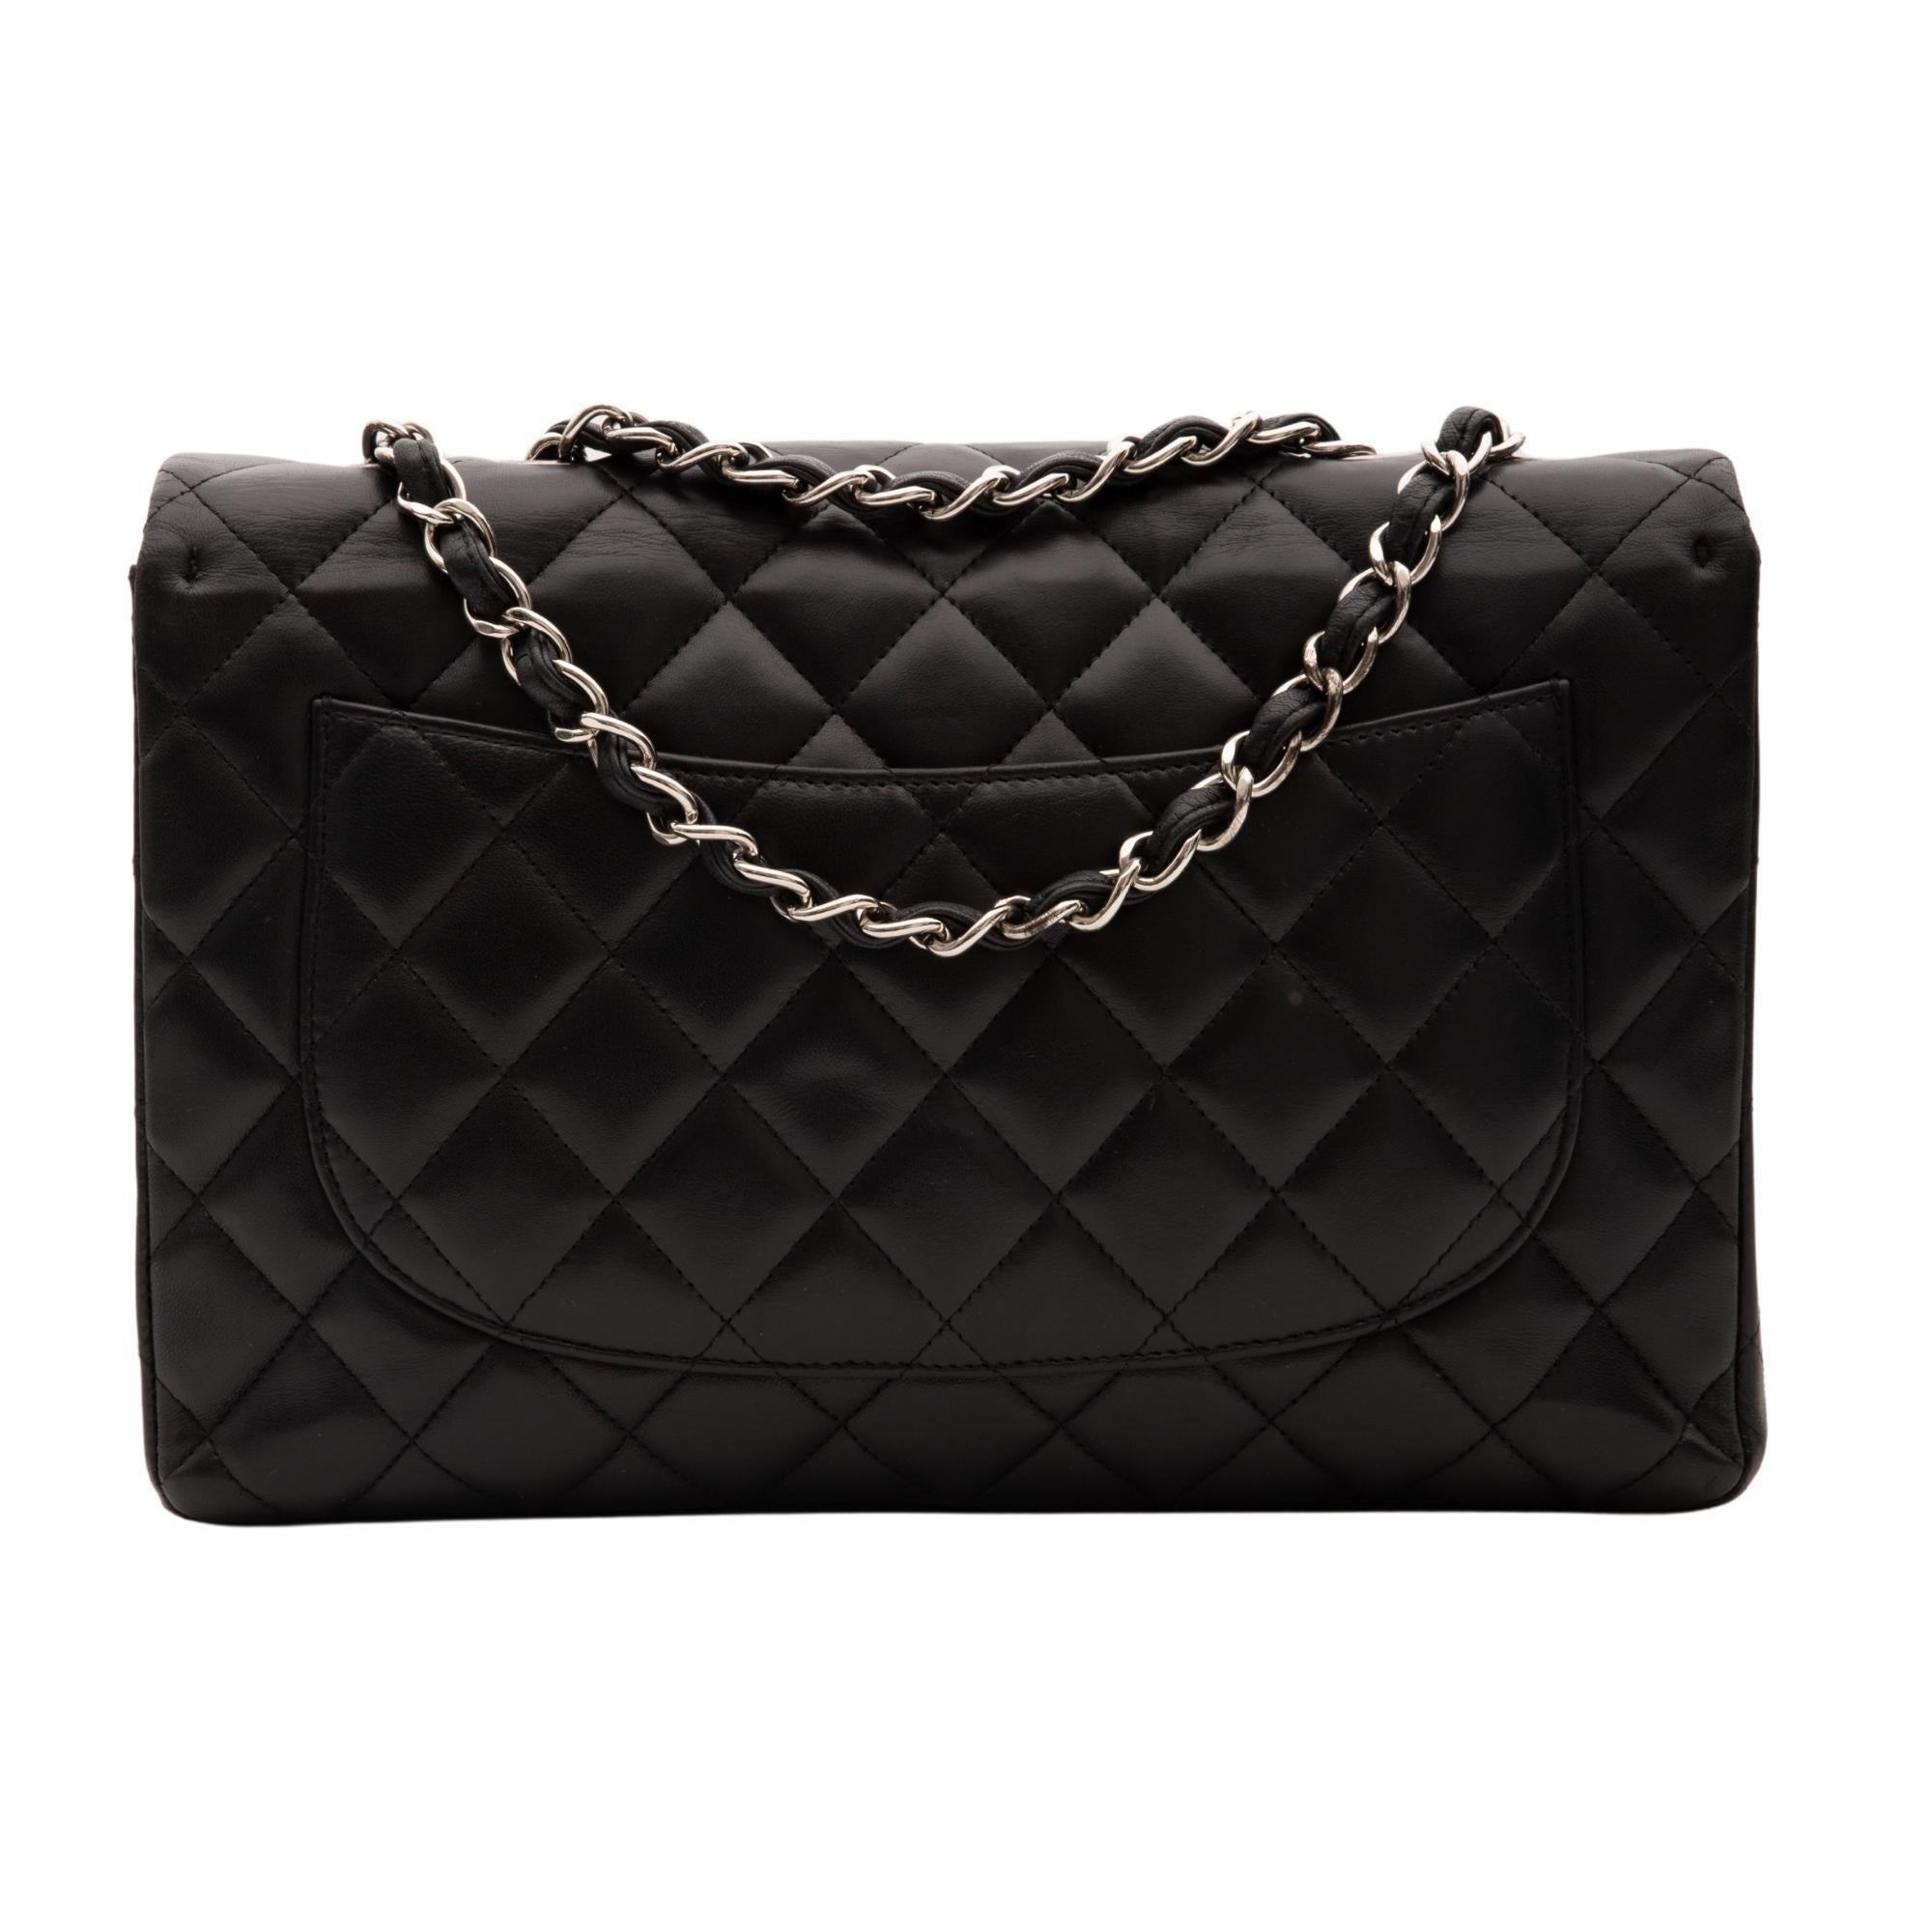 This bag is made with soft and supple lambskin leather in black with diamond quilted stitching. The bag features a single flap, silver tone hardware, CC turn lock closure, back slip pocket and an interior with burgundy leather lining and patch and